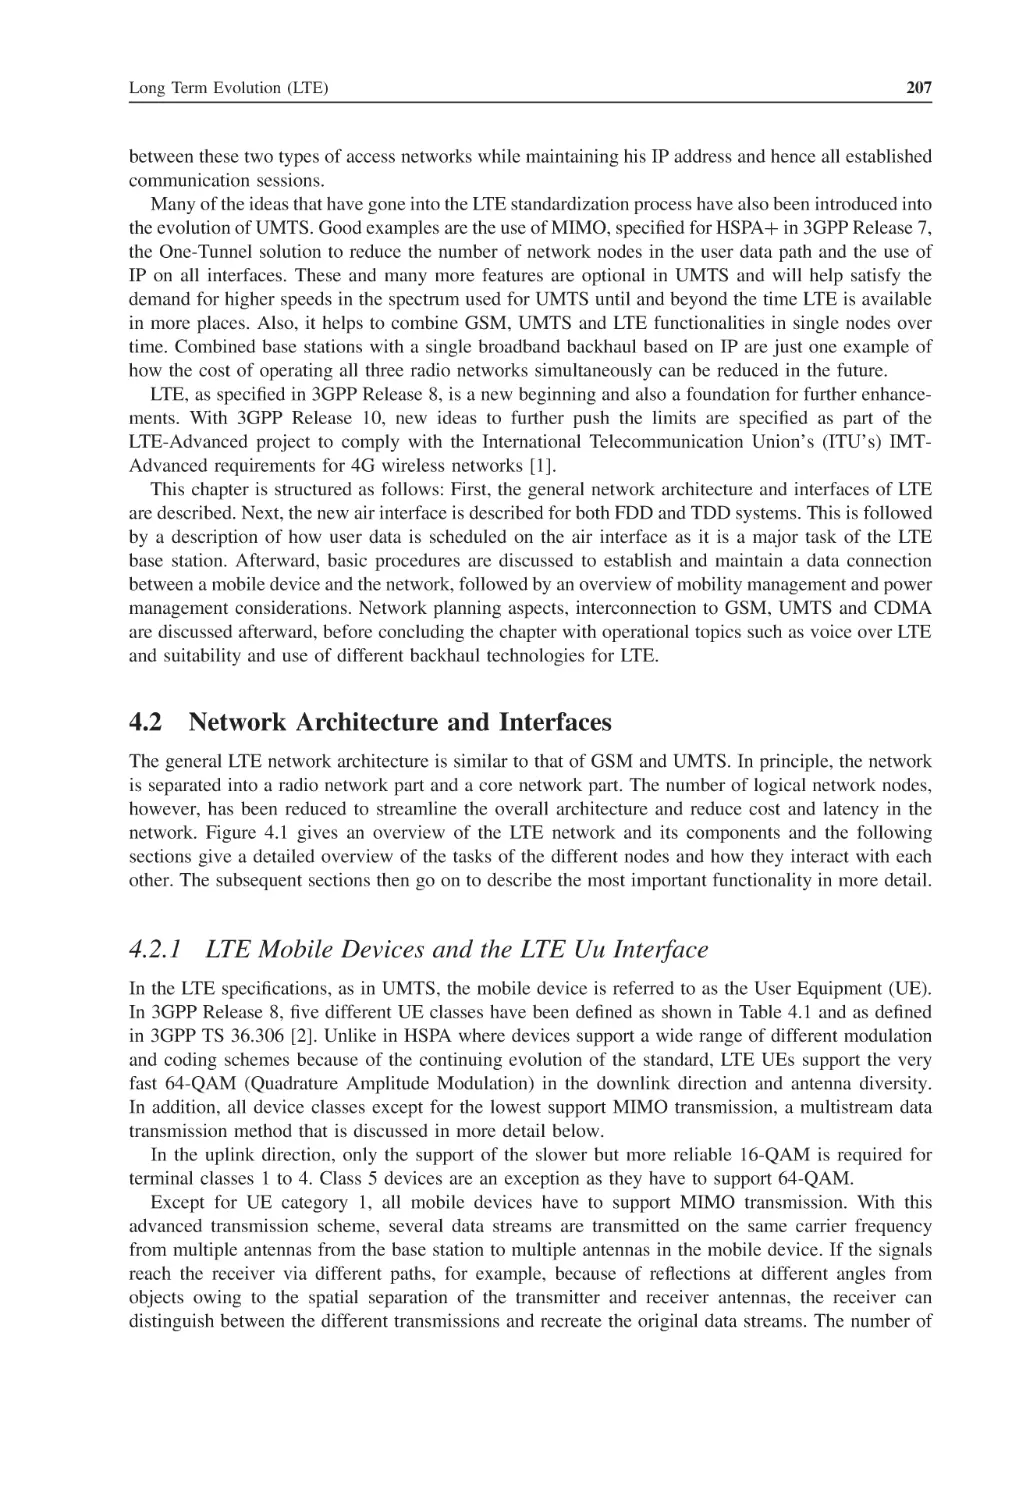 4.2 Network Architecture and Interfaces
4.2.1 LTE Mobile Devices and the LTE Uu Interface